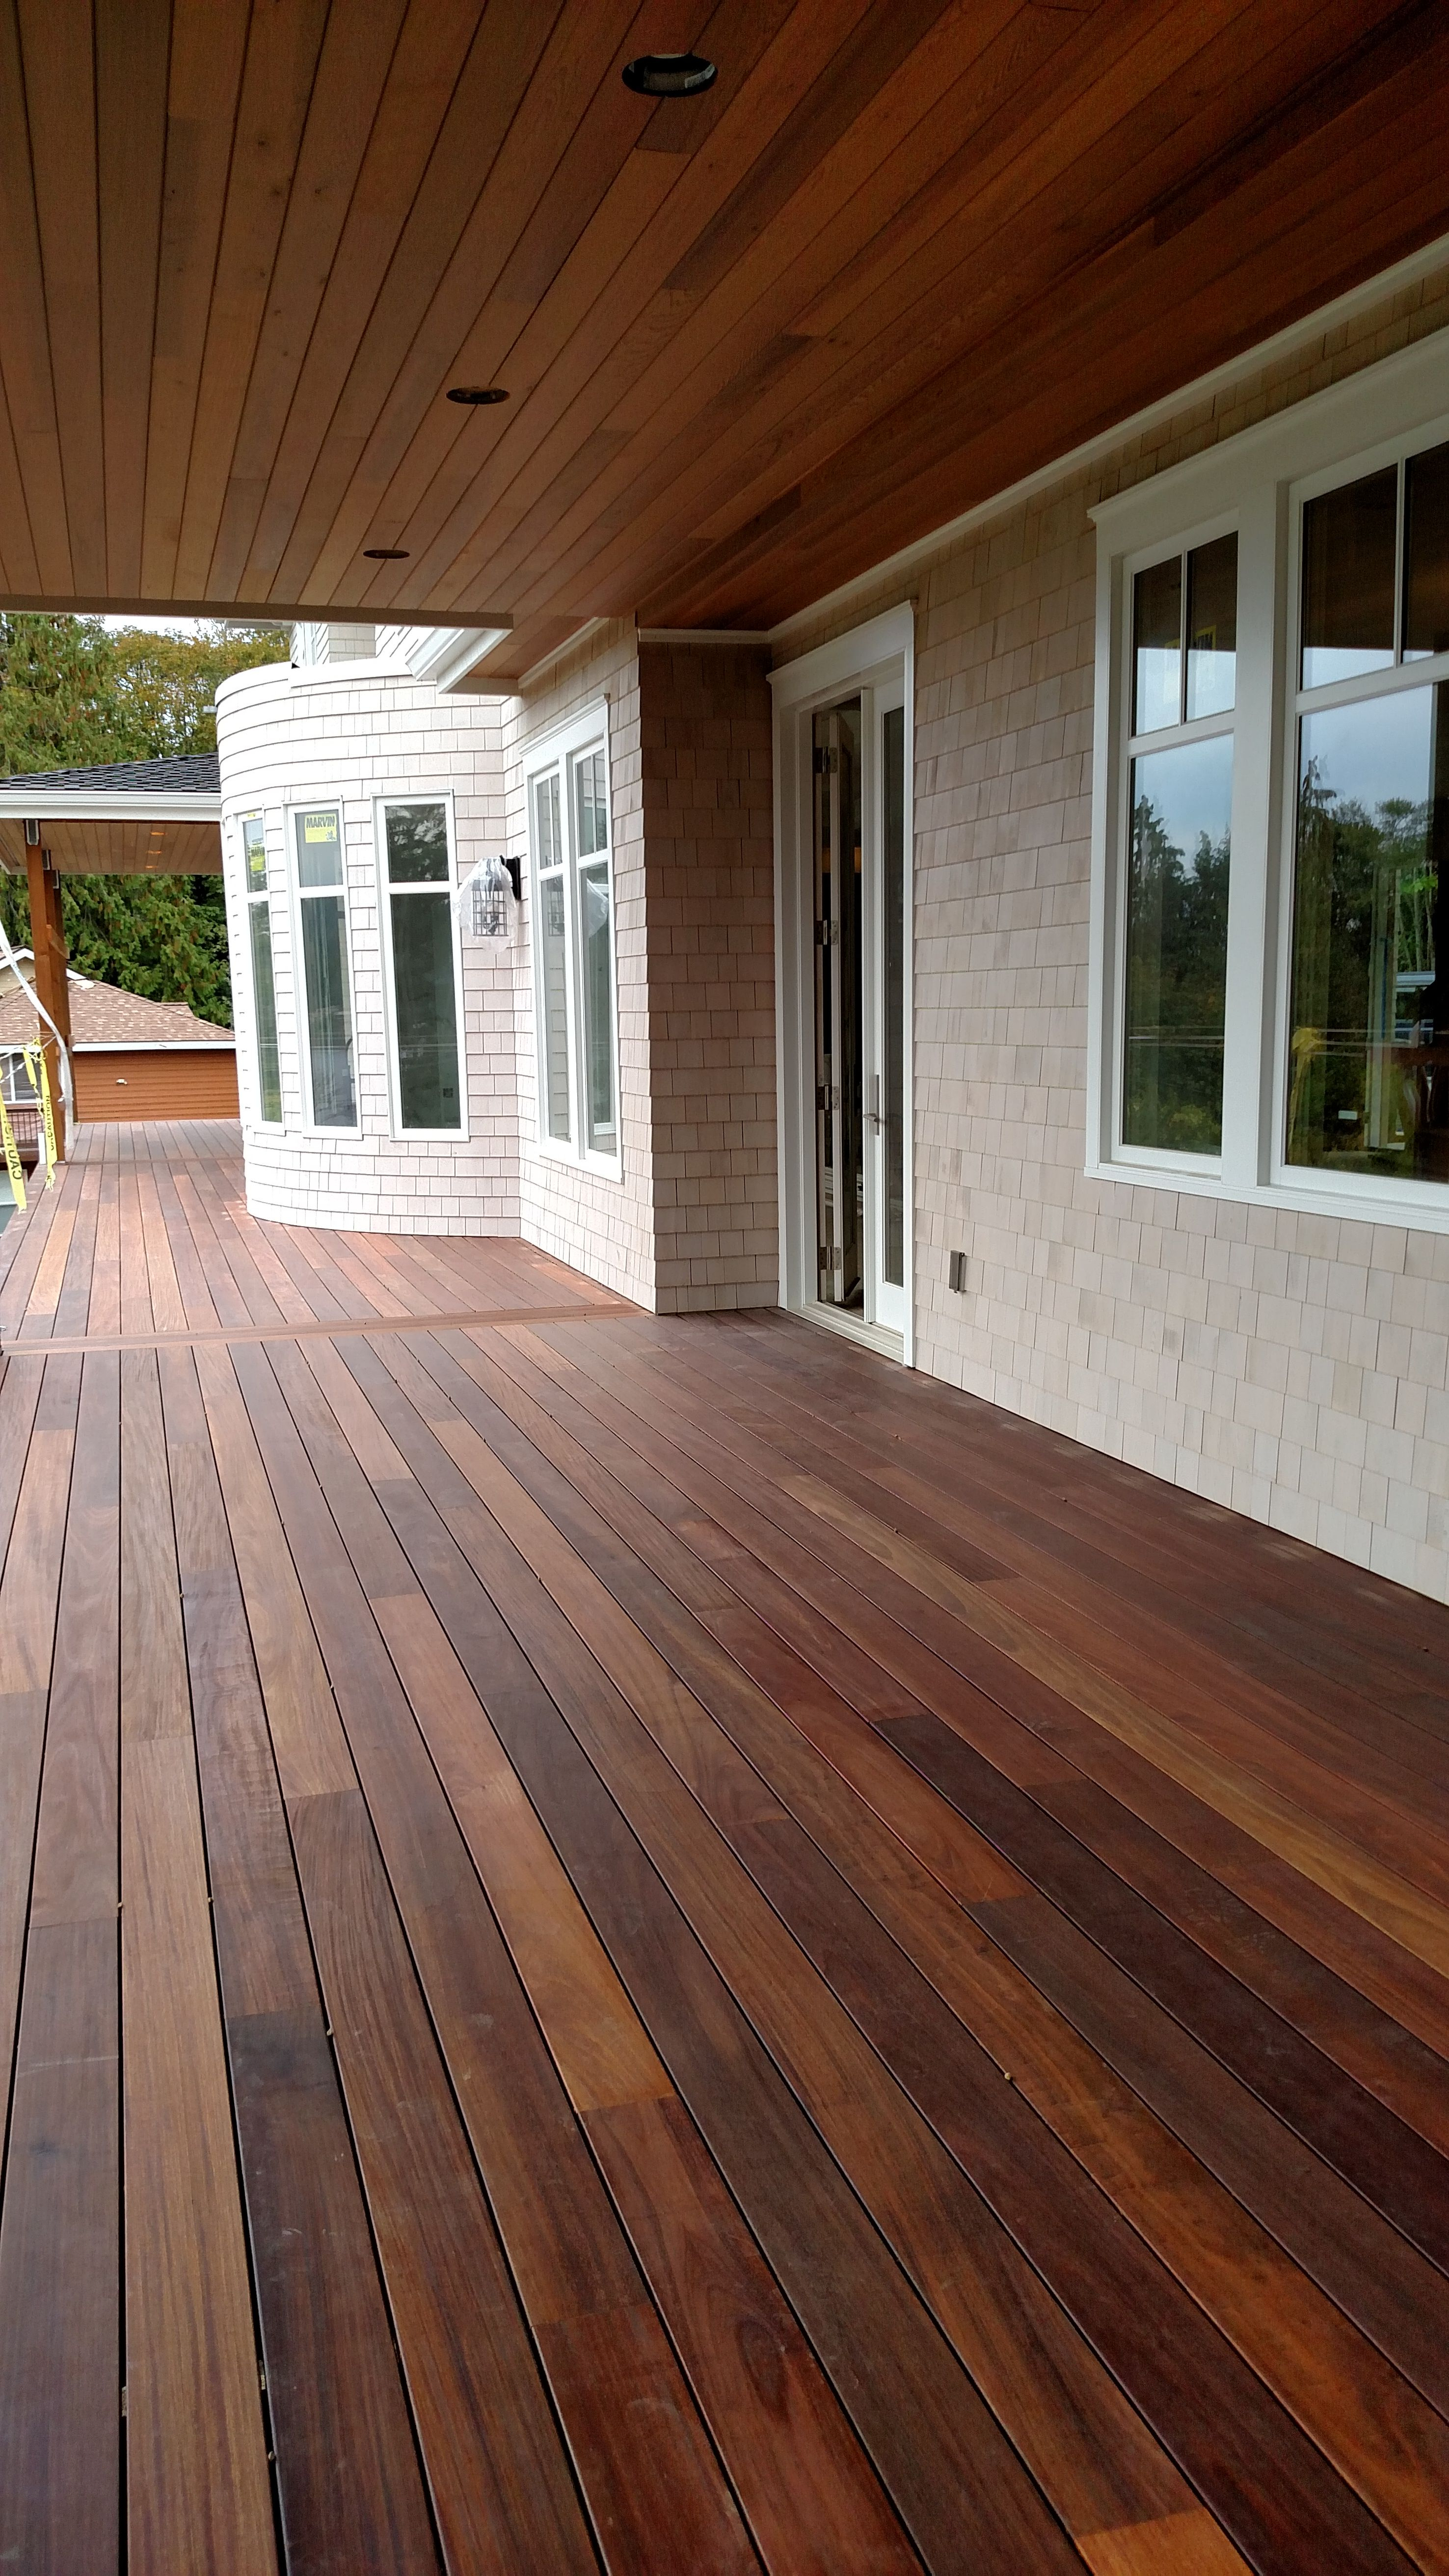 Mahogany Decking Applied With Penofin Exotic Hardwood Exterior Stain within proportions 2952 X 5248